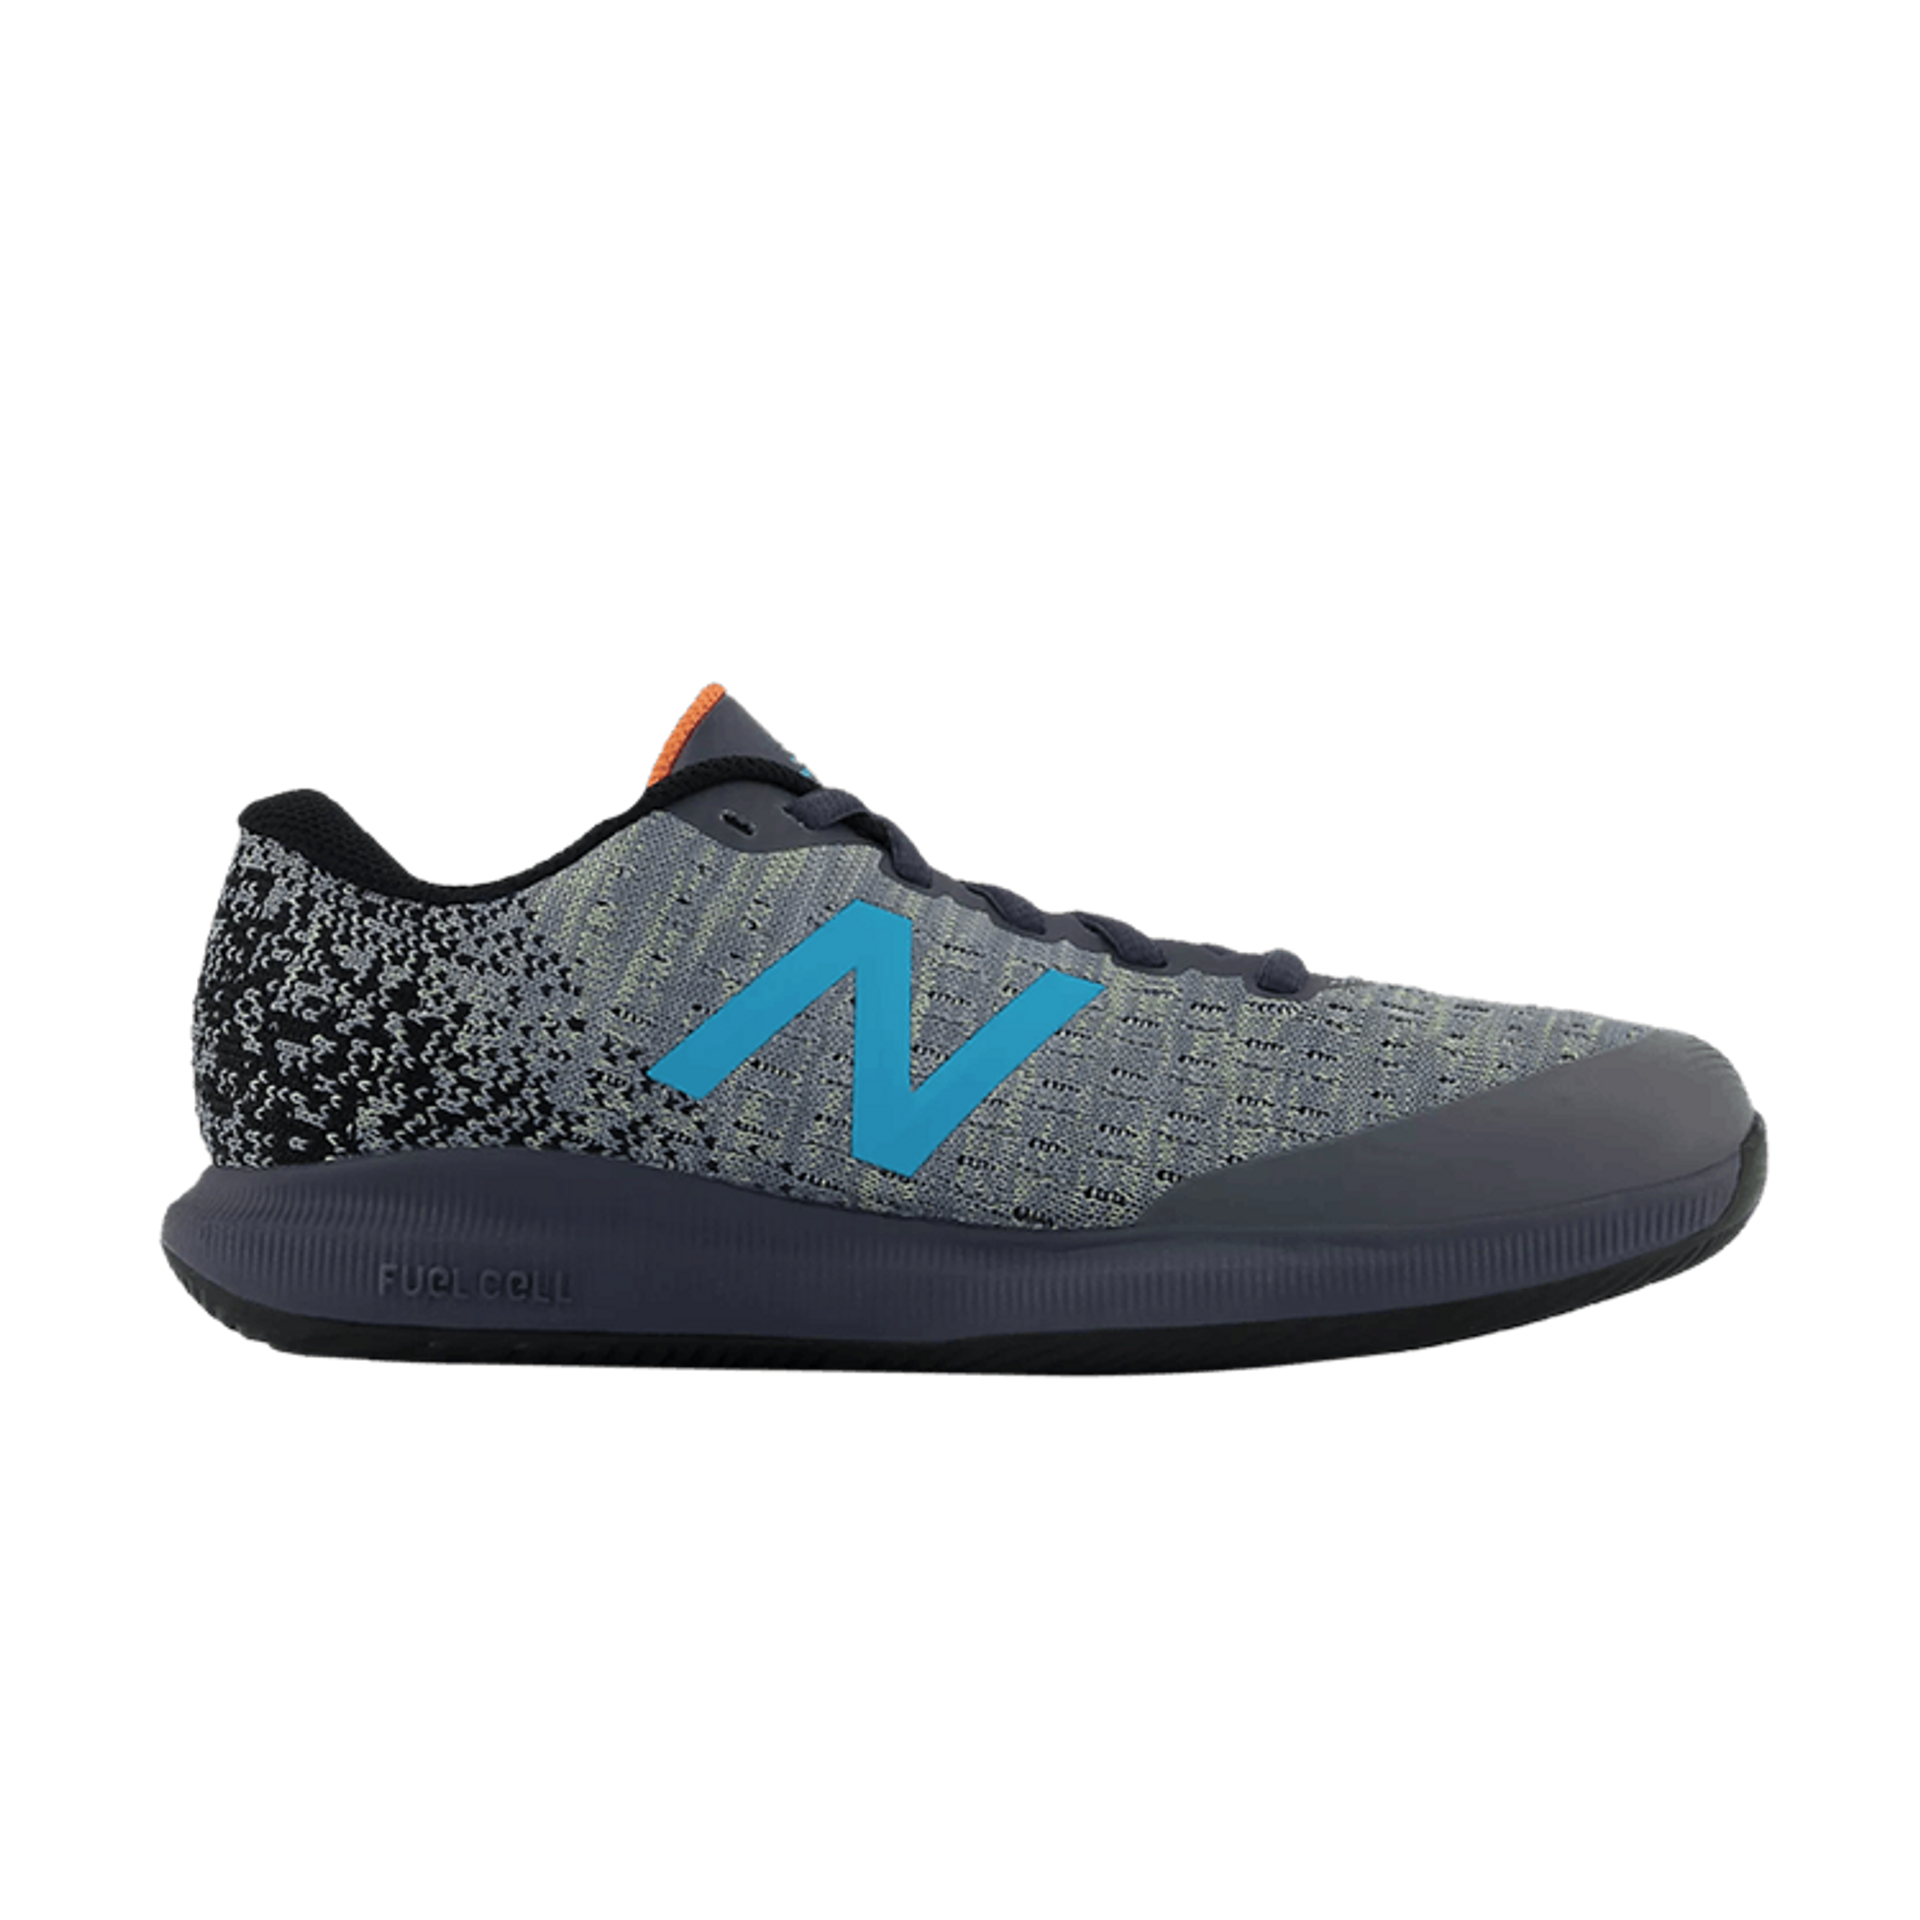 Wmns FuelCell 996v4 Wide 'Grey Citrus'